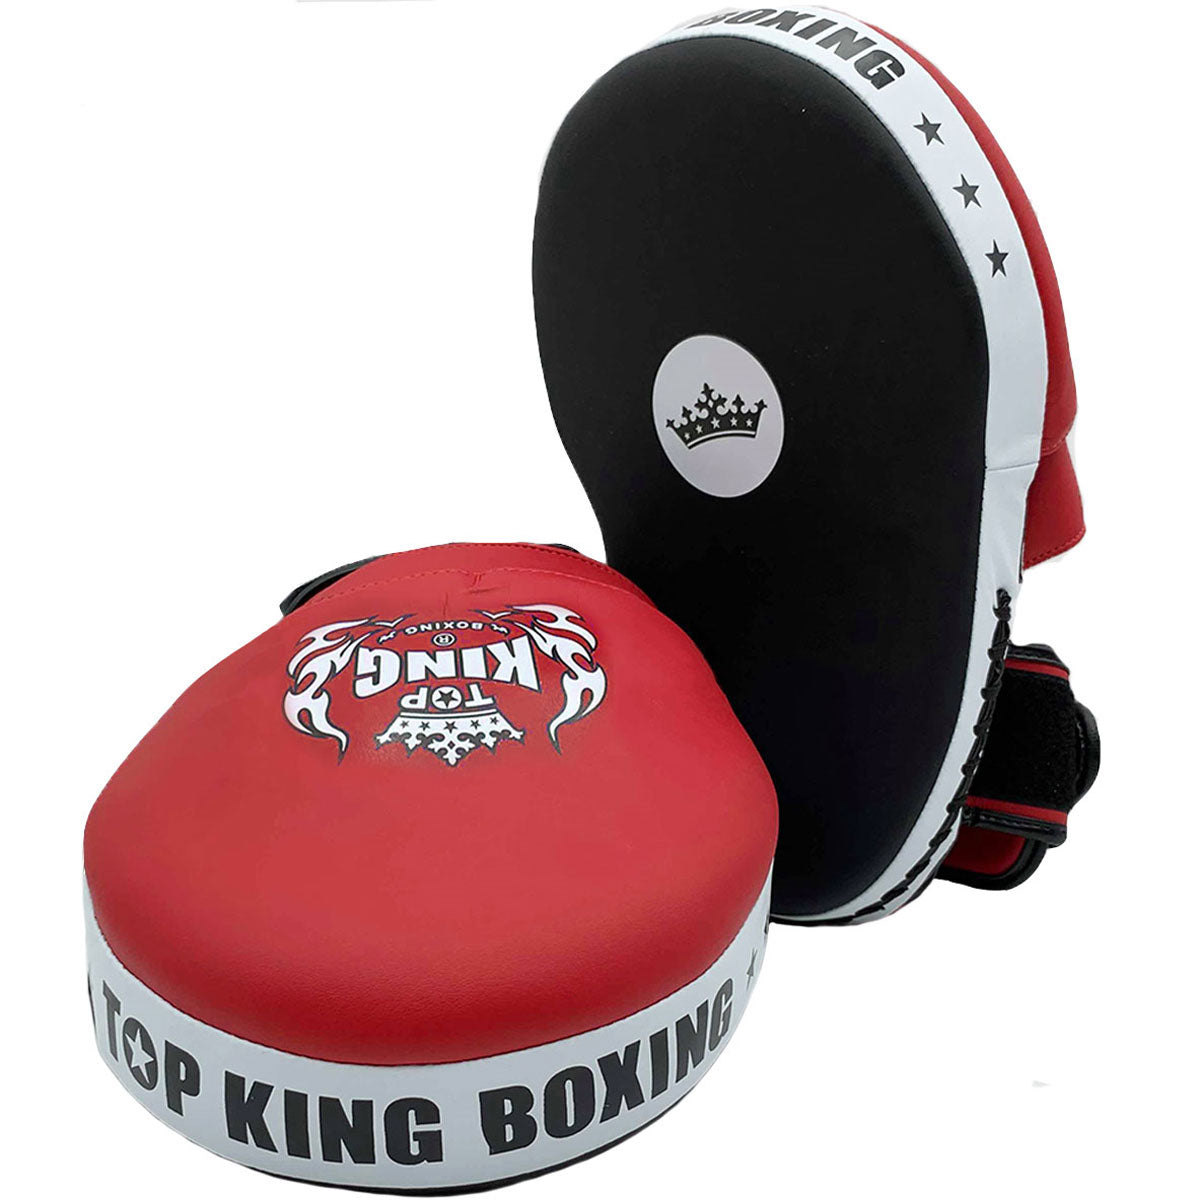 Focus Mitts Top King Boxing TKFME Black Red White “Extreme”